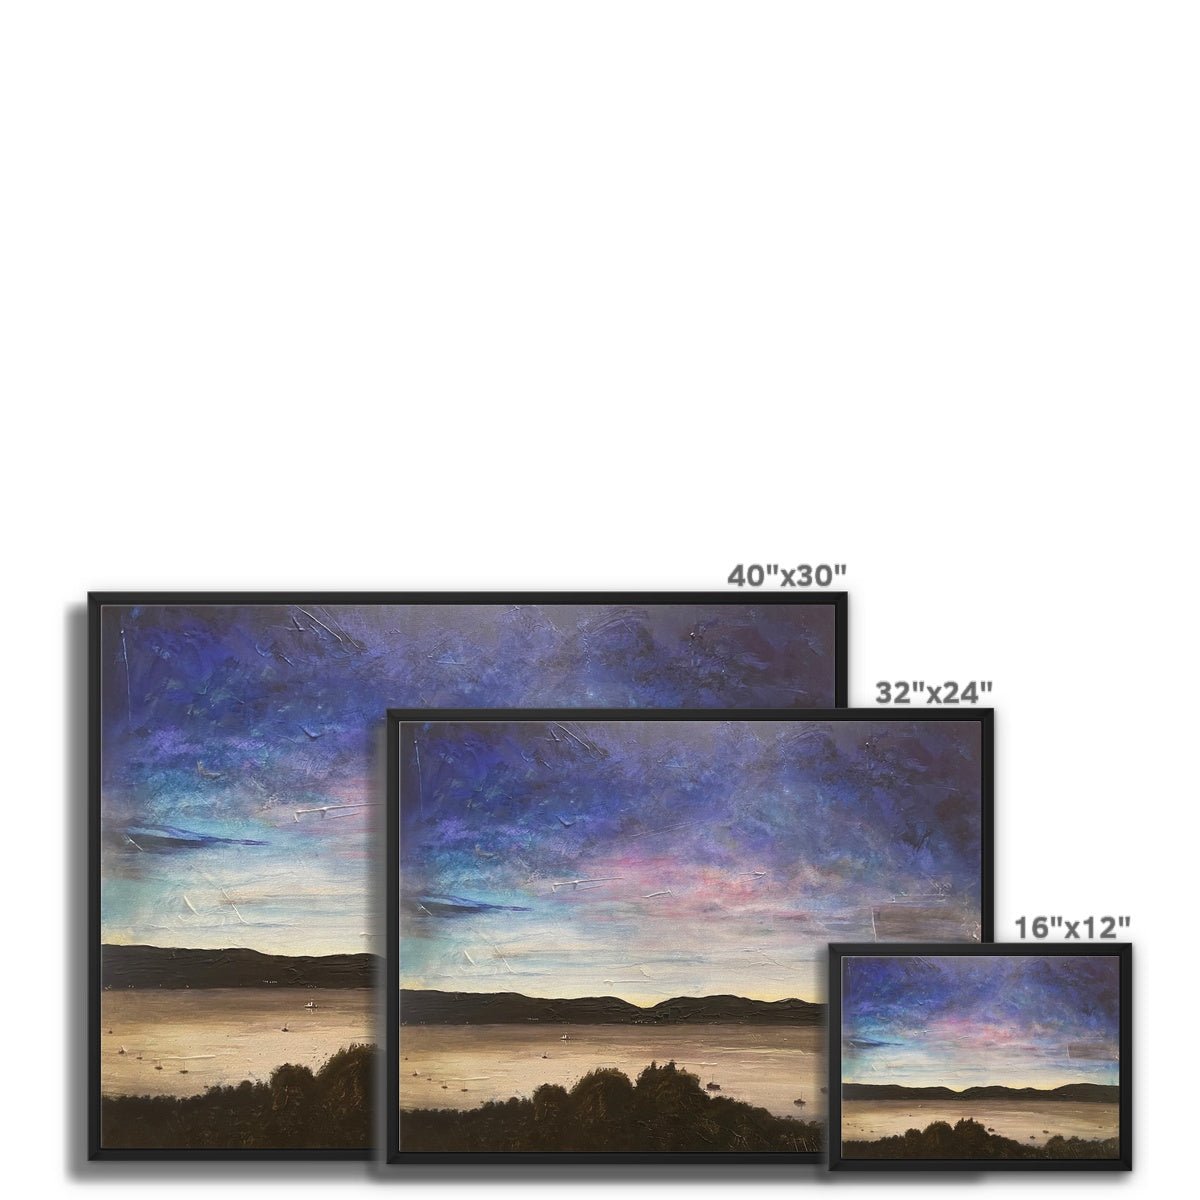 River Clyde Twilight Painting | Framed Canvas From Scotland-Floating Framed Canvas Prints-River Clyde Art Gallery-Paintings, Prints, Homeware, Art Gifts From Scotland By Scottish Artist Kevin Hunter